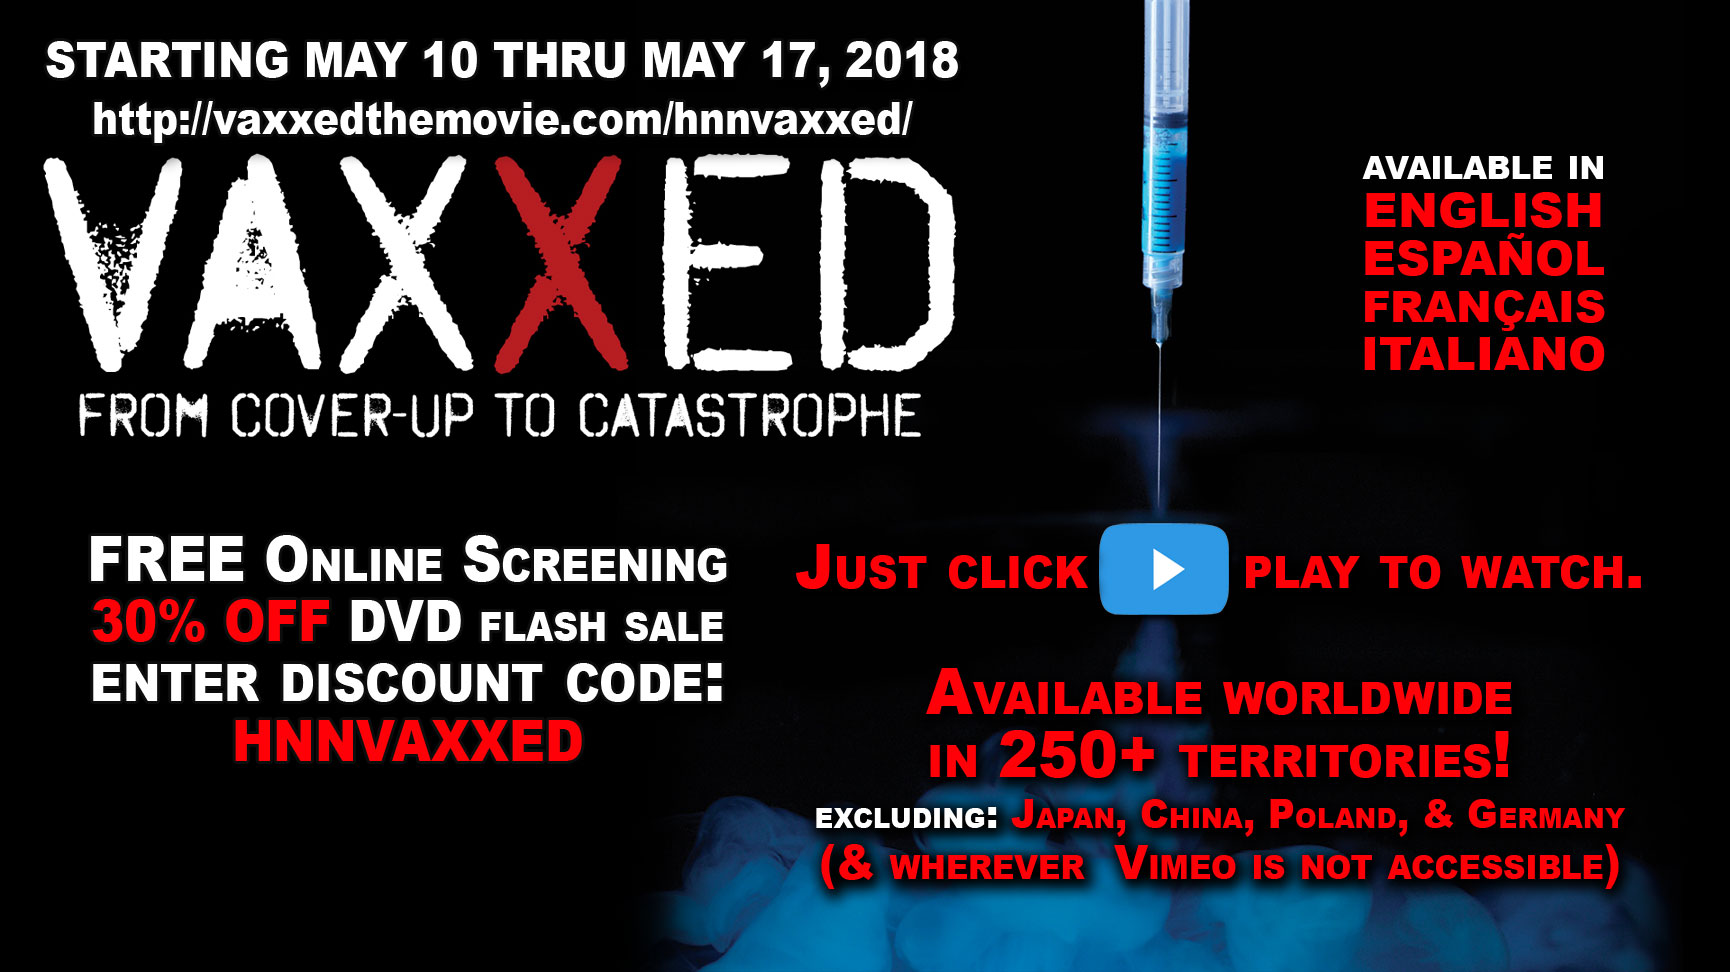 Vaxxed: From cover-up to catastrophe, FREE TO WATCH until May 17th